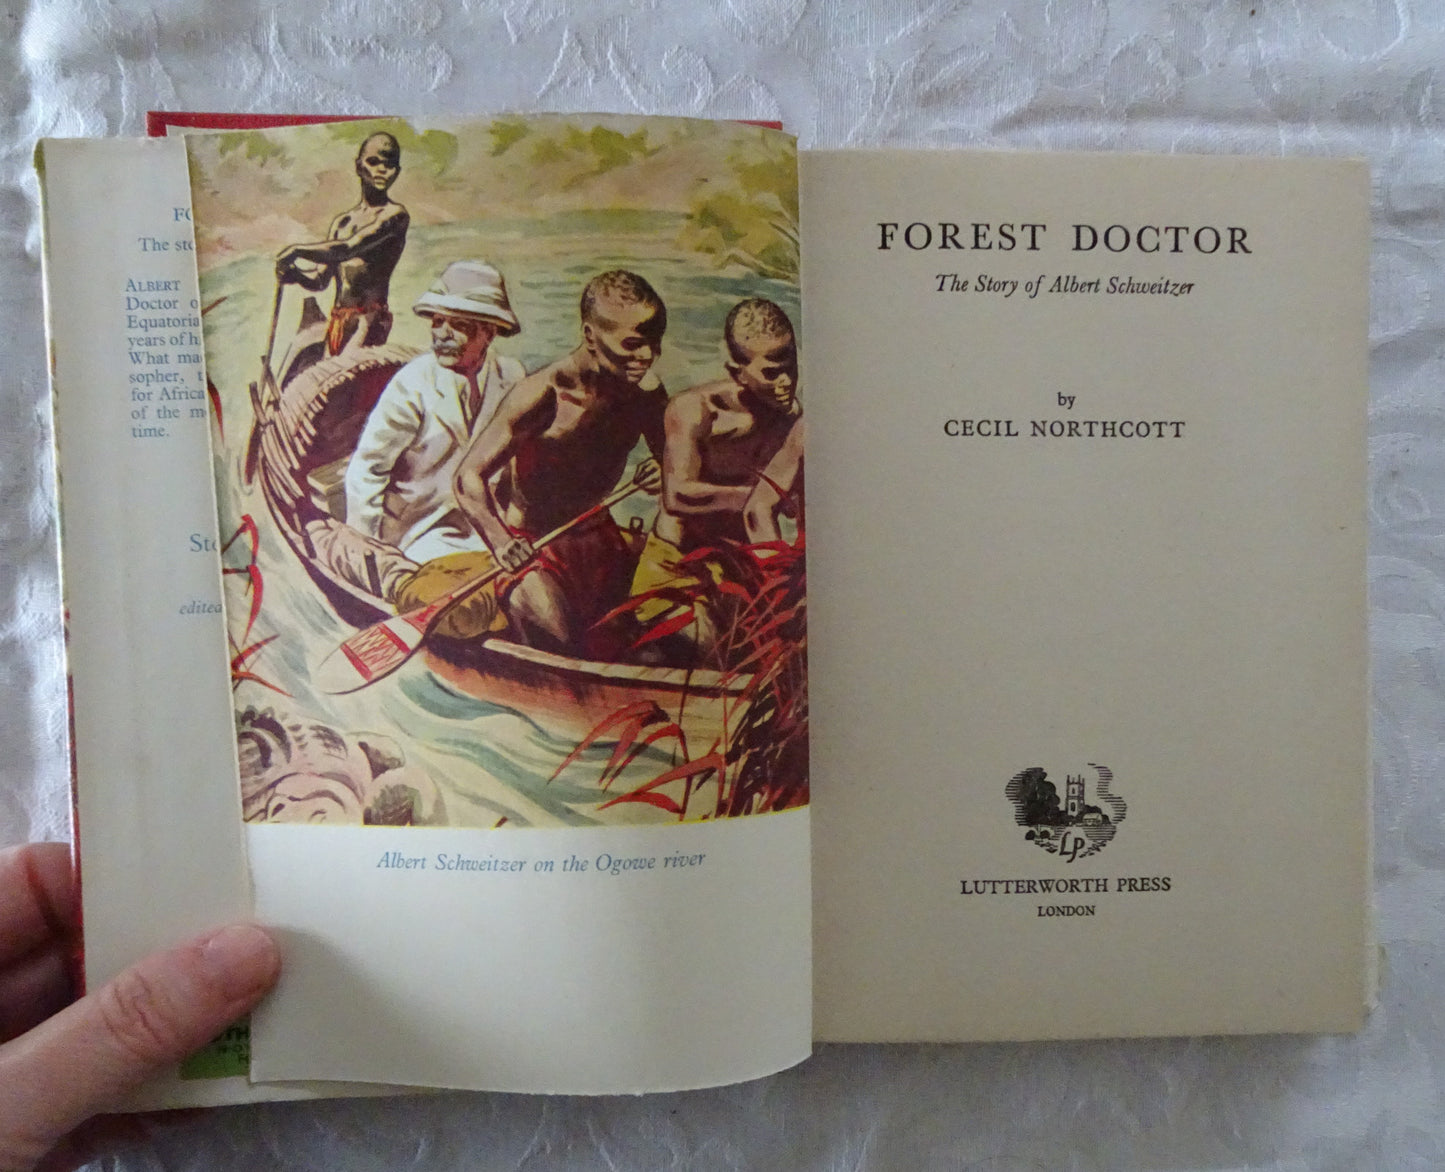 Forest Doctor by Cecil Northcott